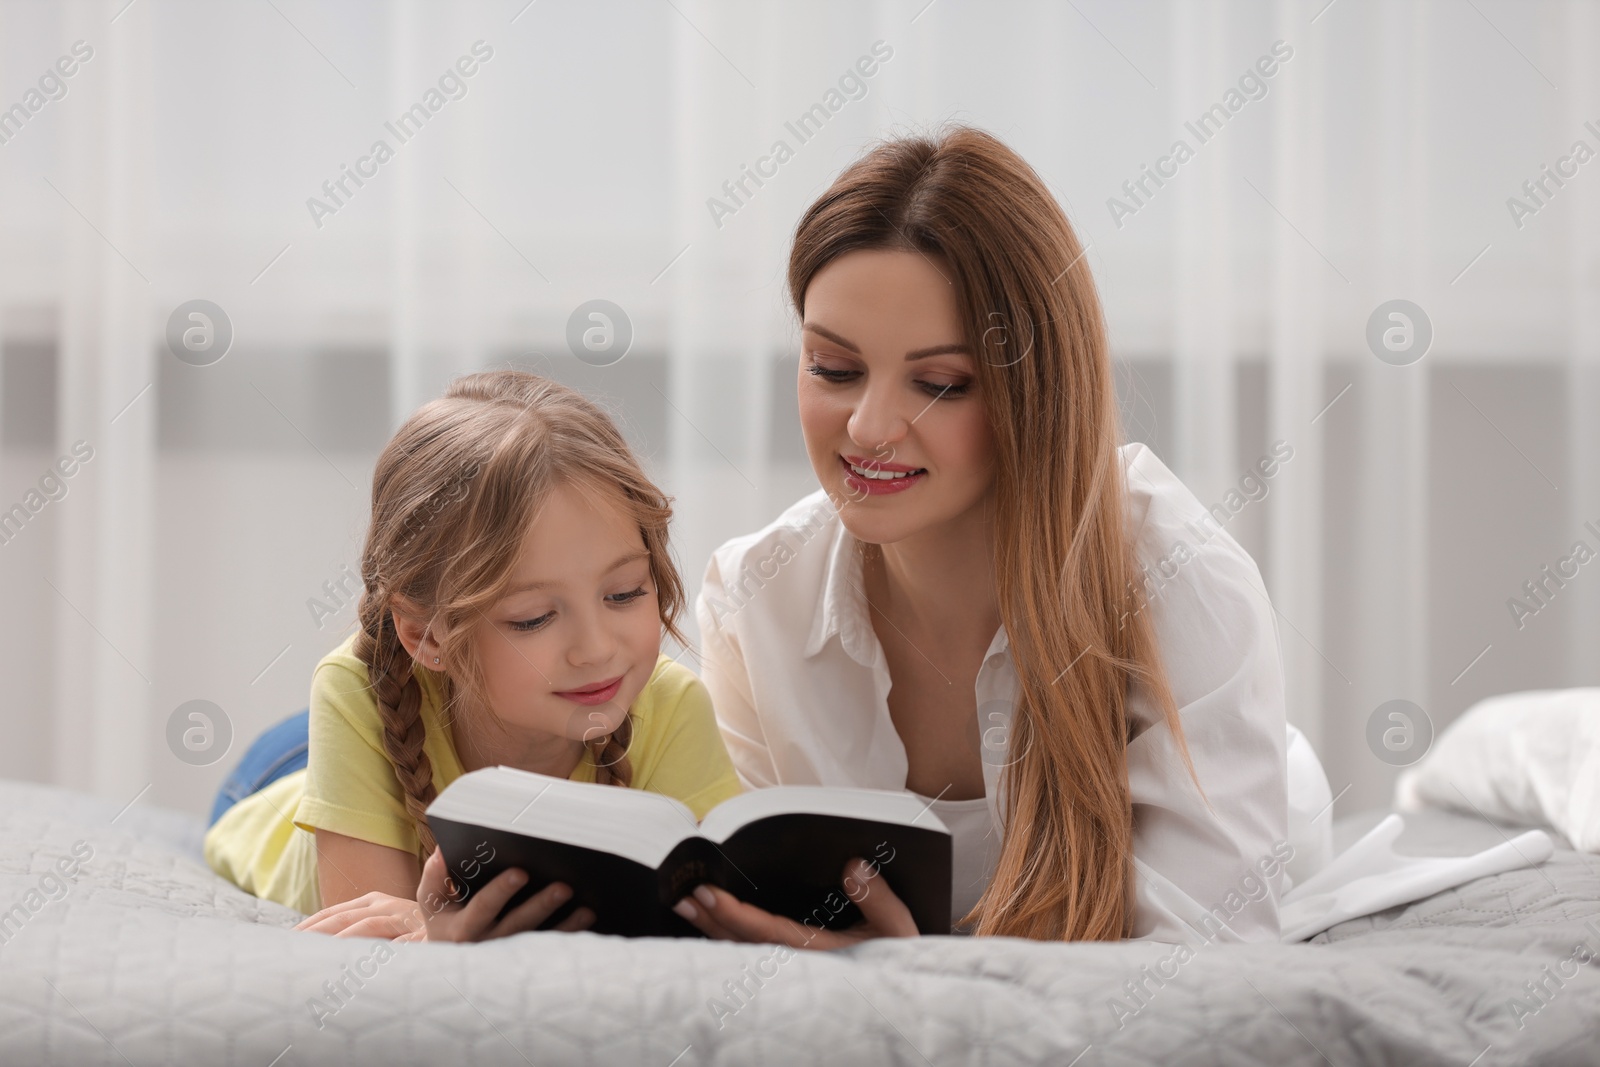 Photo of Girl and her godparent reading Bible together on bed at home